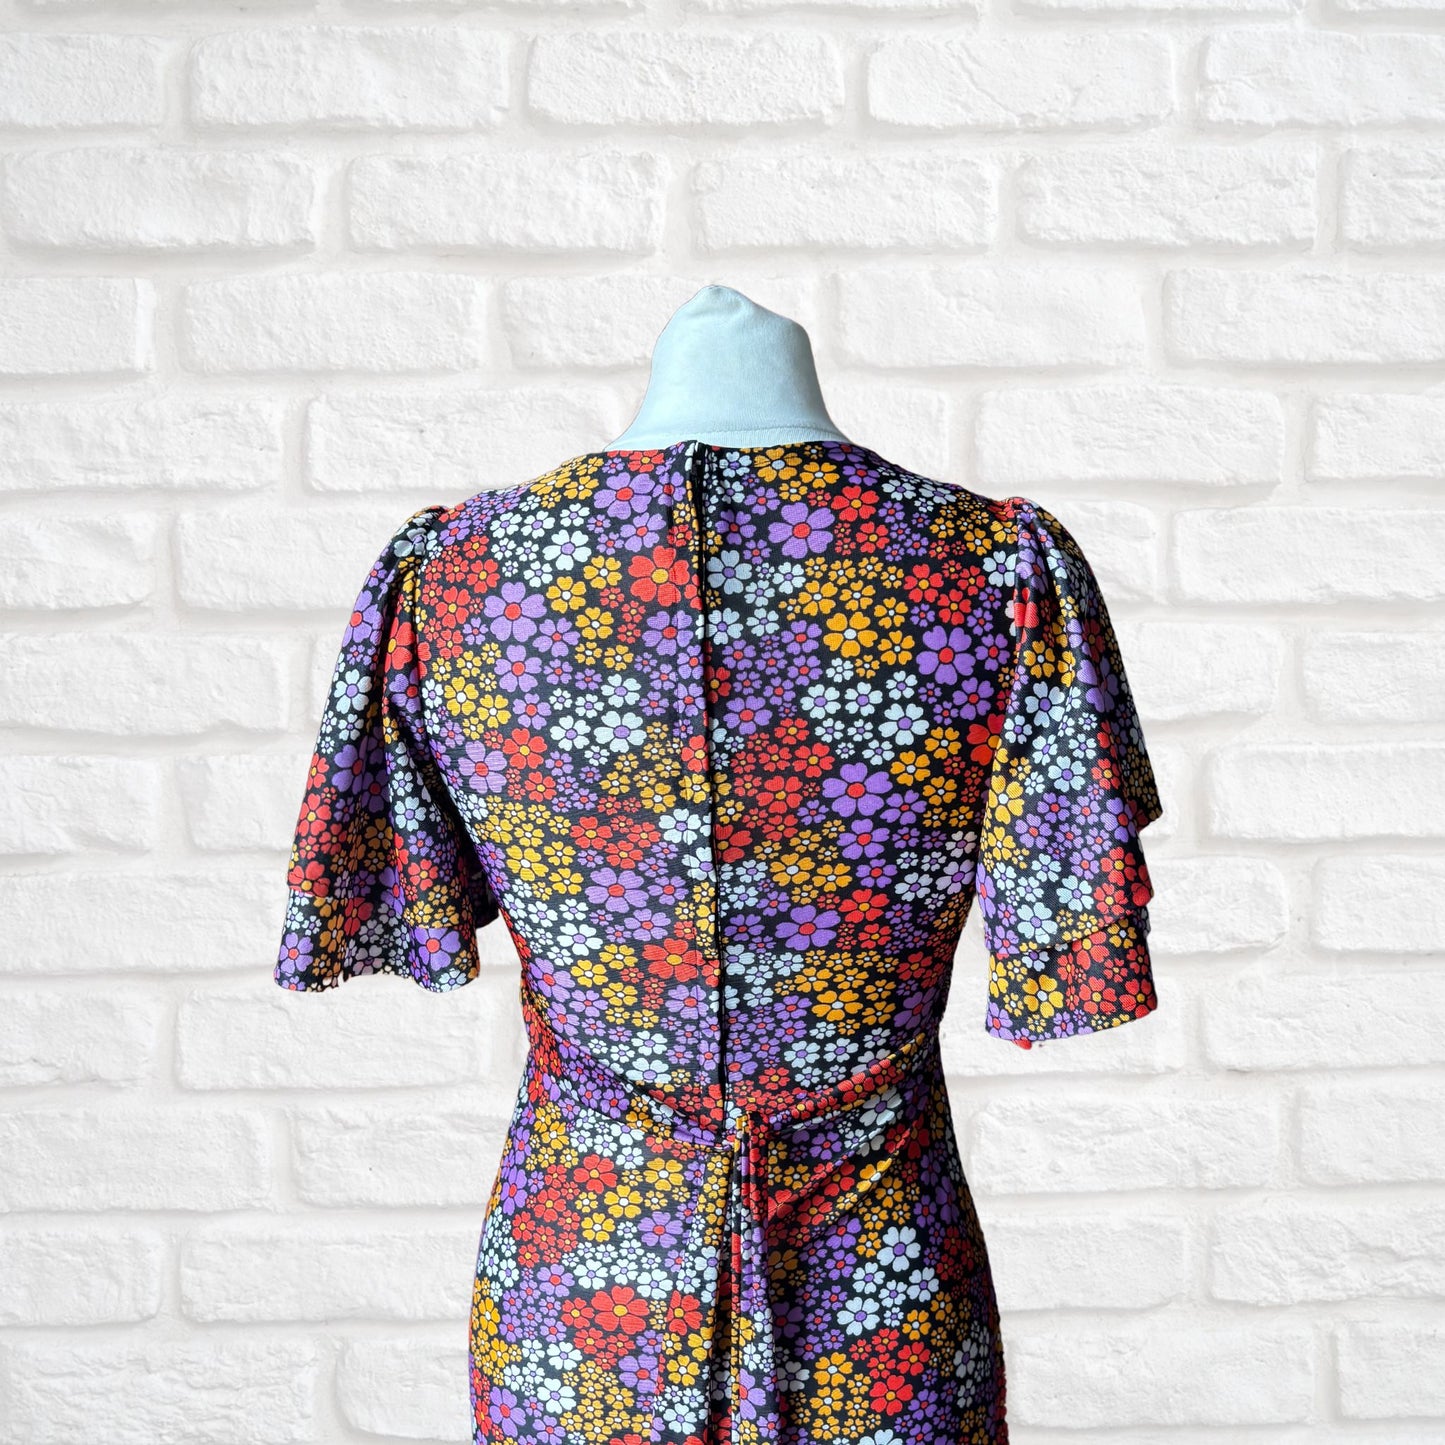 Vintage 70s Black and Bright Floral Print Dress Dress with Angel Sleeves. Approx UK size 8-10